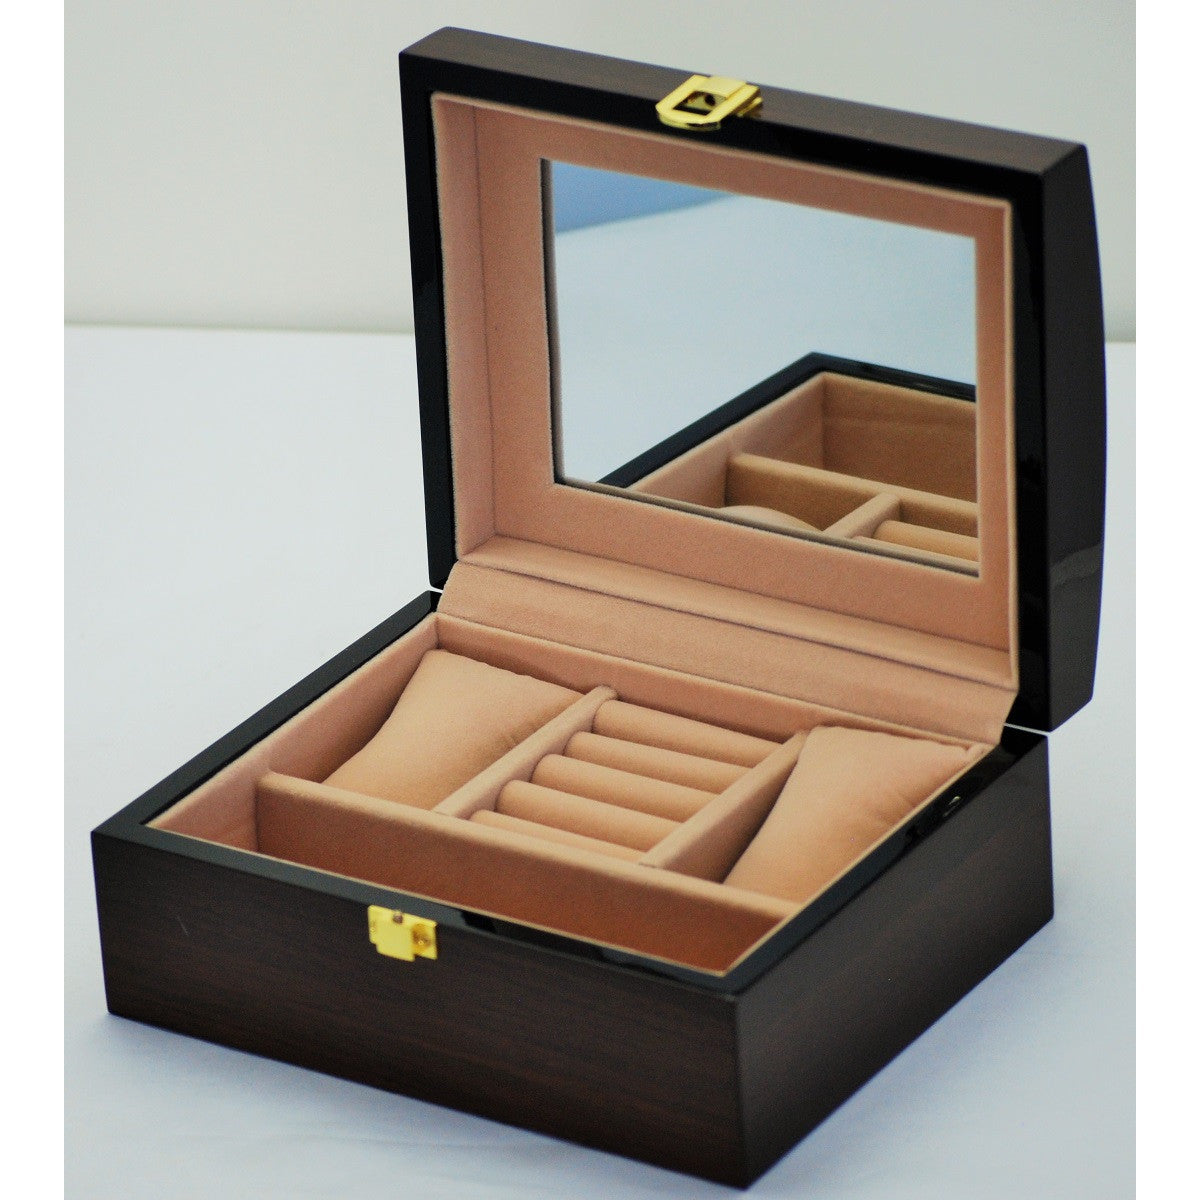 Pearl Time Jewellery Watch Box, Curved Top, Dark Brown Finish, 20cm